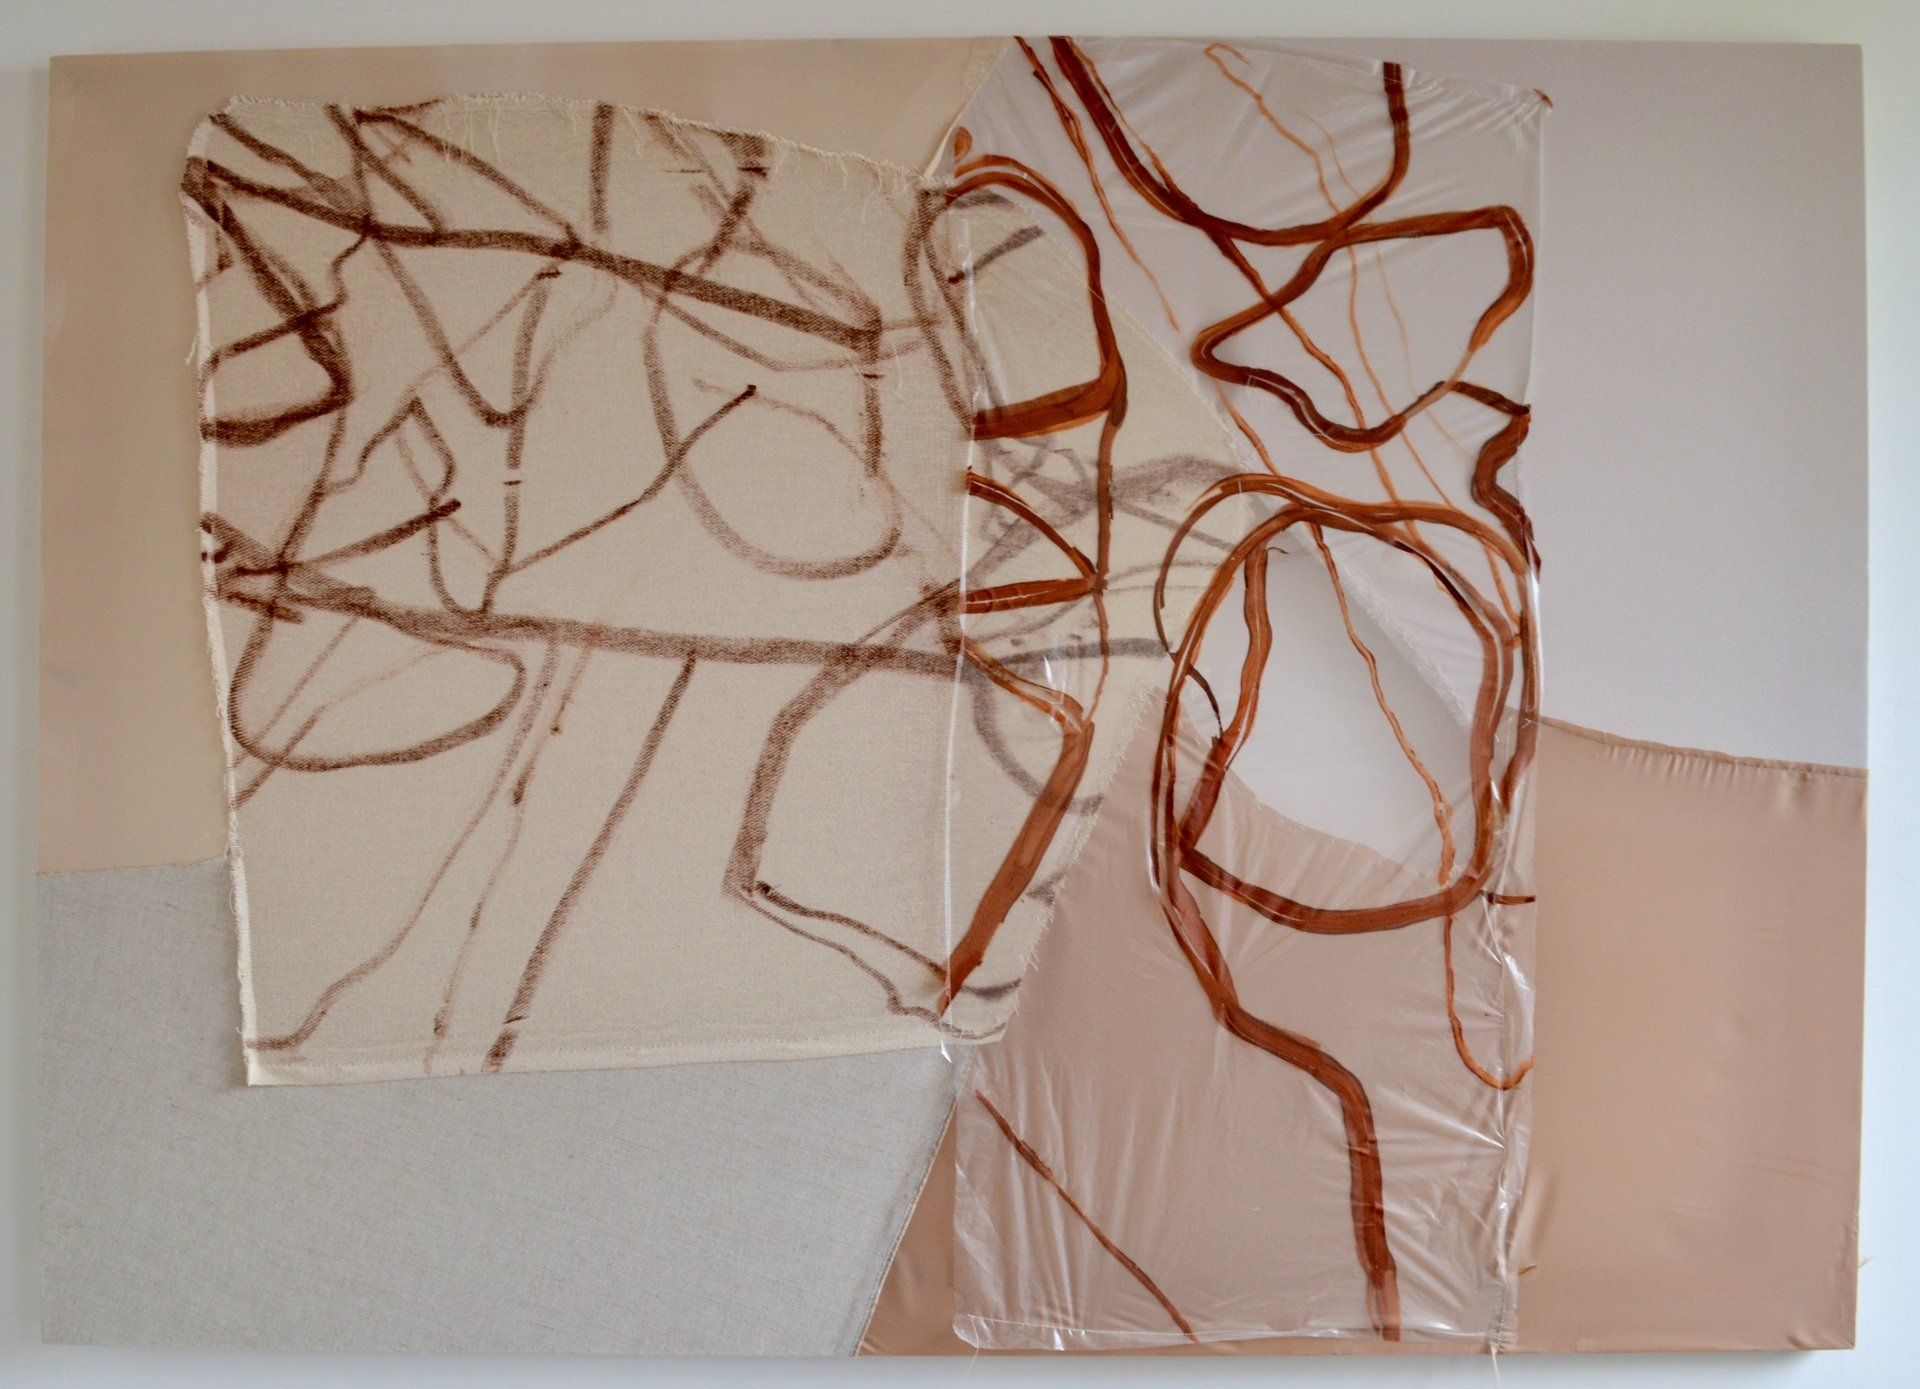 Abstract painting by Siobhan McLaughlin. Brown, pink, cream and red lines on fabric